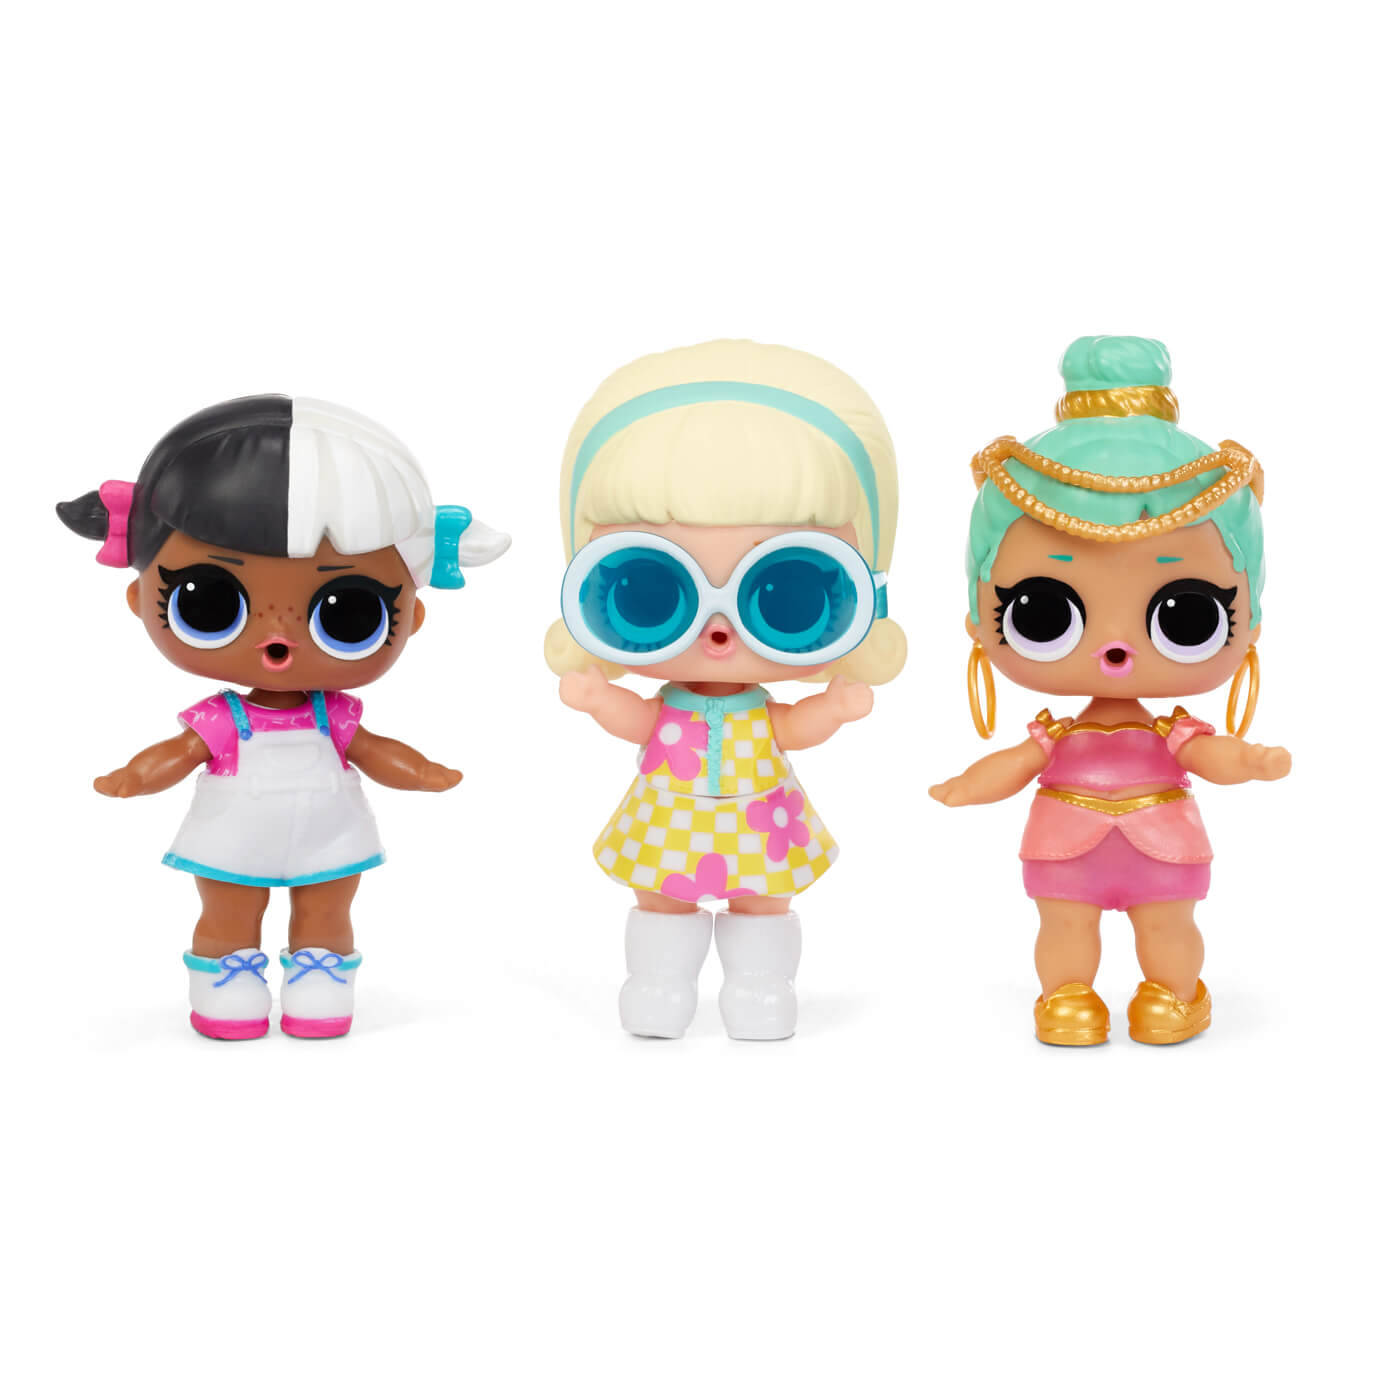 A Group Of Dolls With Sunglasses And Hair Background